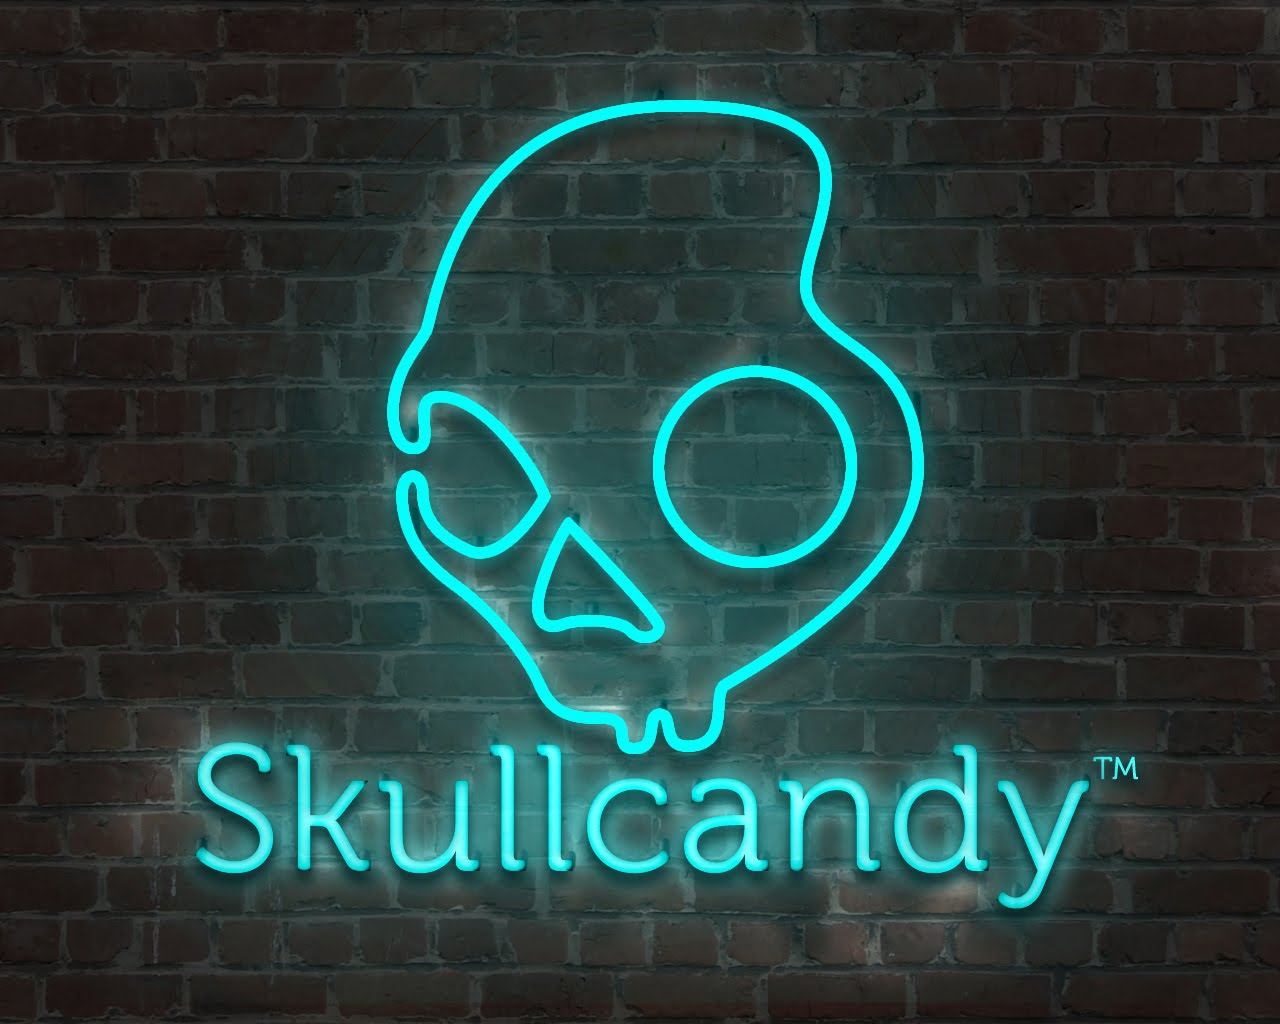 Free Download Skullcandy Logo 2 Wallpaper Wallpapers And Pictures 1280x1024 For Your Desktop Mobile Tablet Explore 75 Skullcandy Wallpaper Evil Skull Wallpaper Cool Skull Wallpaper Awesome Skull Wallpapers